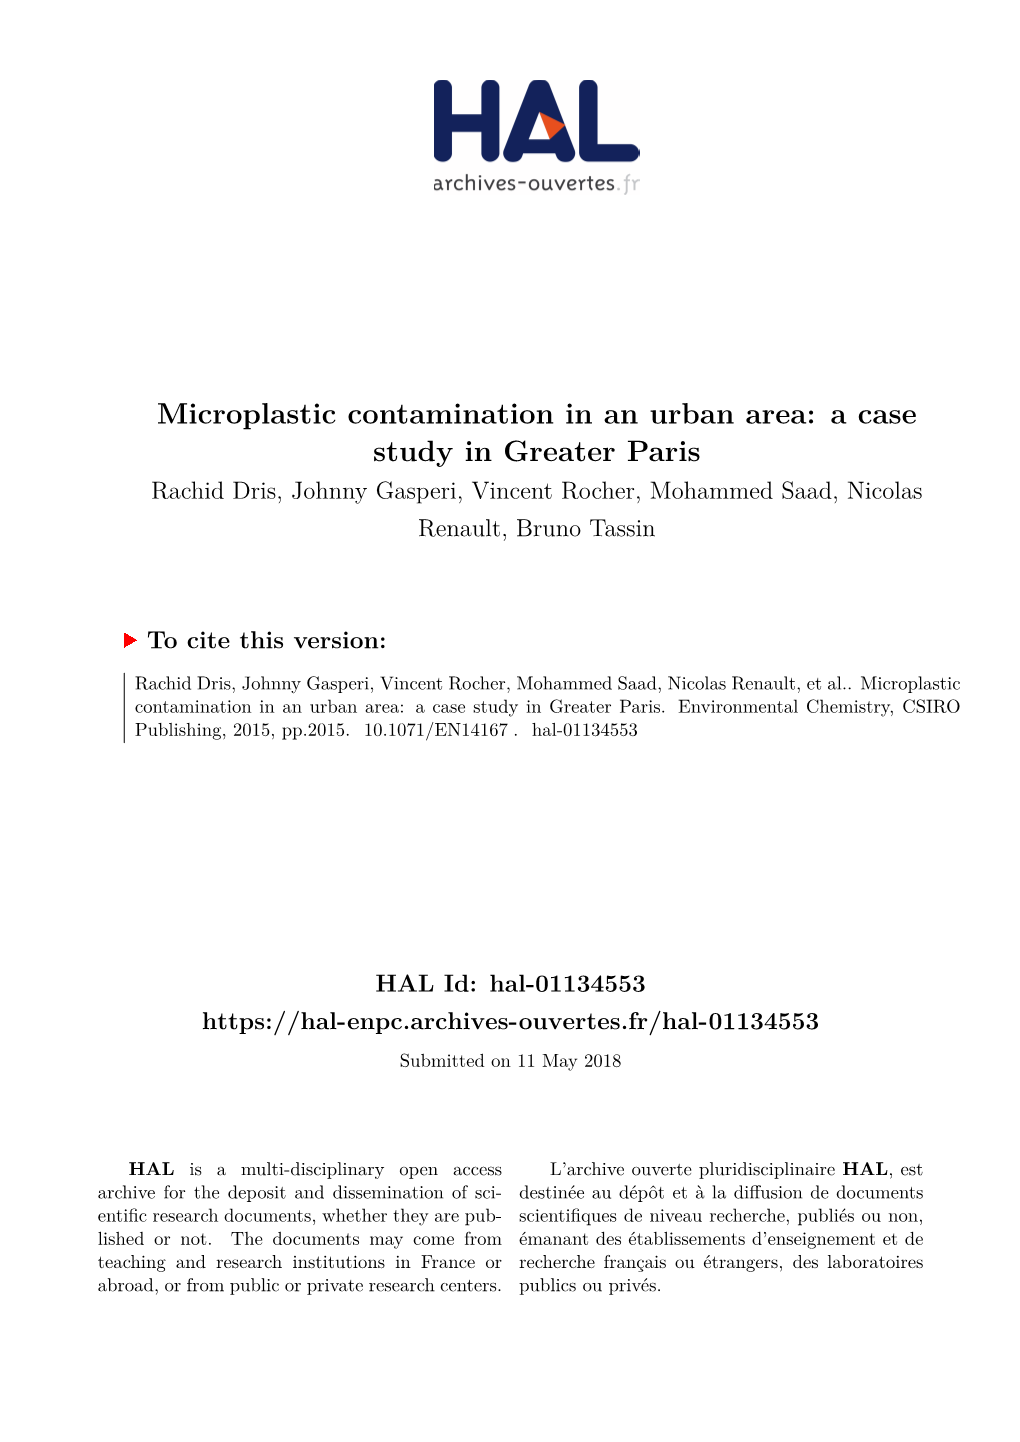 Microplastic Contamination in an Urban Area: a Case Study in Greater Paris Rachid Dris, Johnny Gasperi, Vincent Rocher, Mohammed Saad, Nicolas Renault, Bruno Tassin